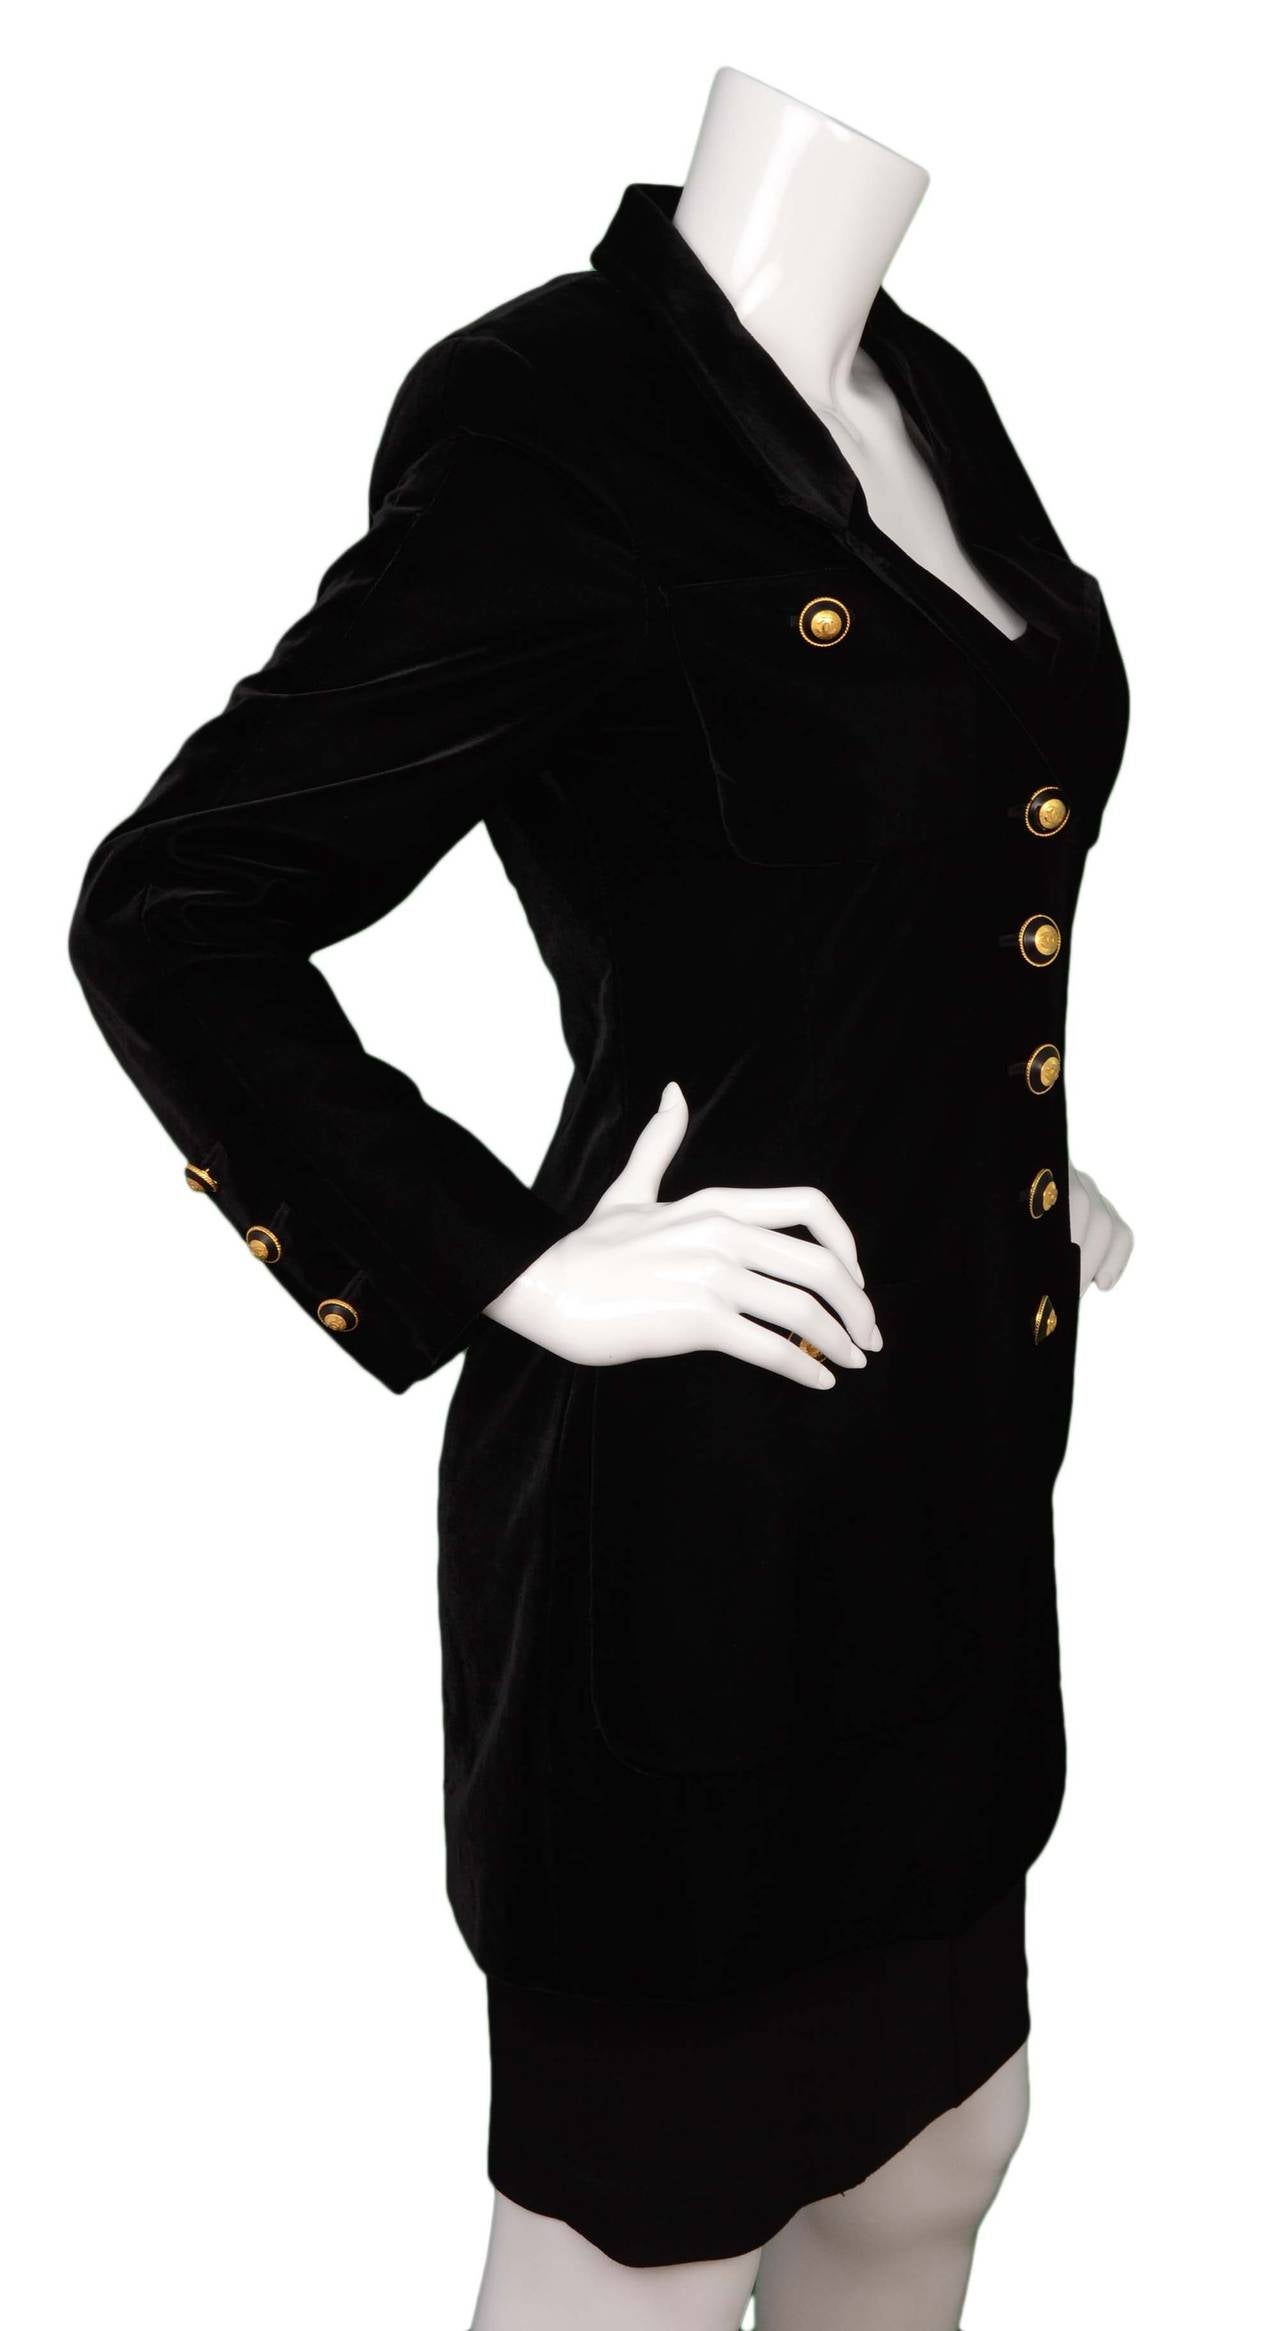 Chanel Vintage Black Velvet Long Jacket
Features goldtone and black CC buttons
Color: Black
Composition: Missing composition tags- believed to be Velvet
Lining: Believed to be 100% silk
Closure/opening: Front and center button down
Exterior